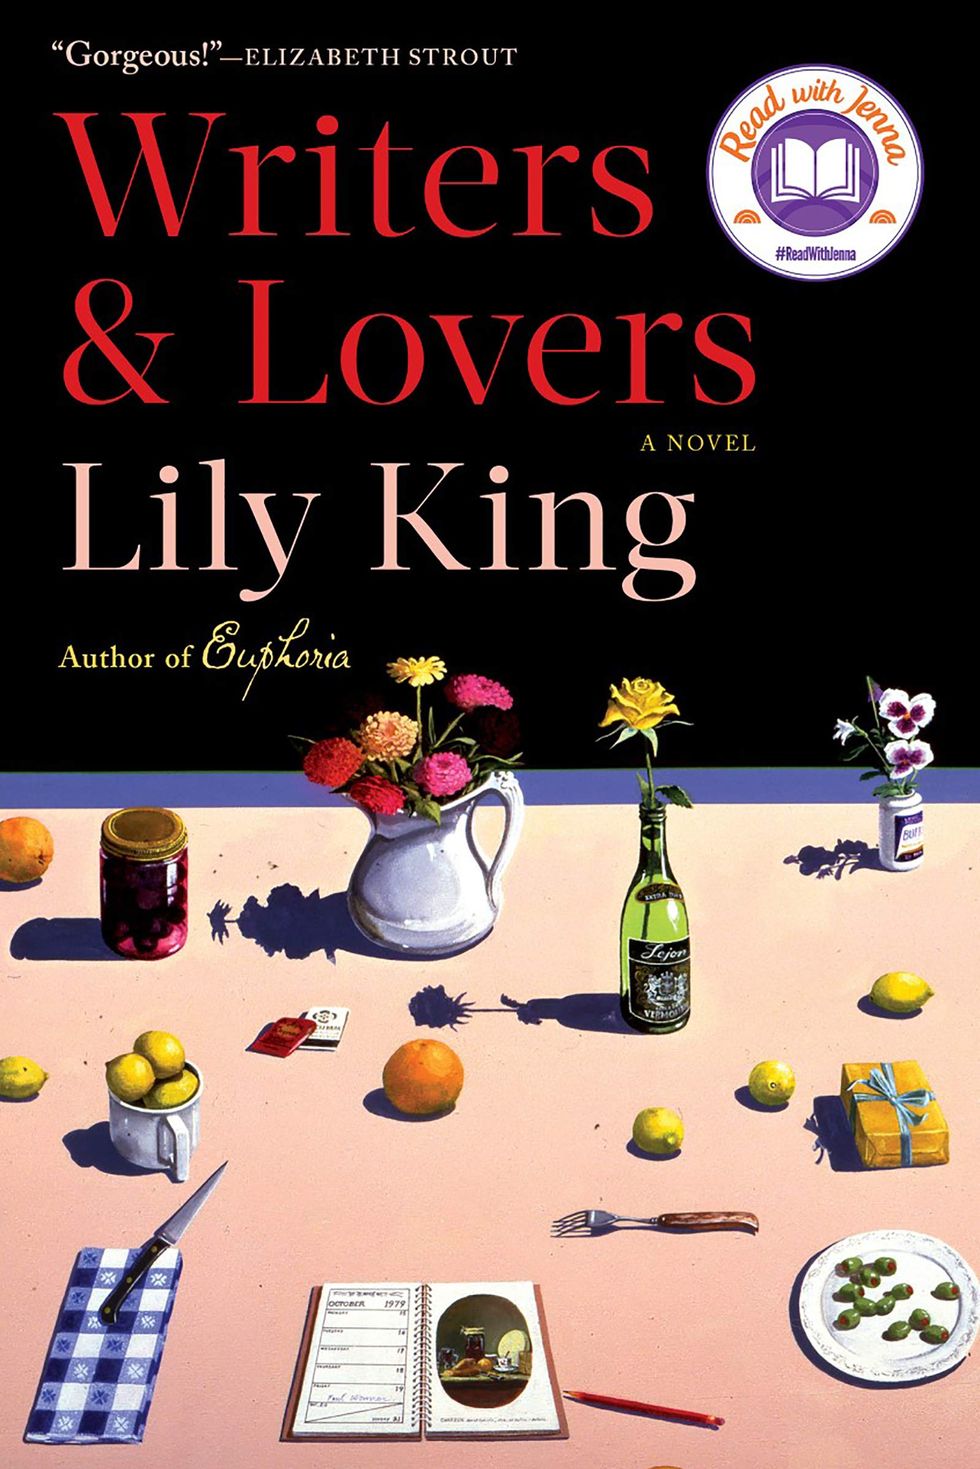 <i>Writers & Lovers</I> by Lily King